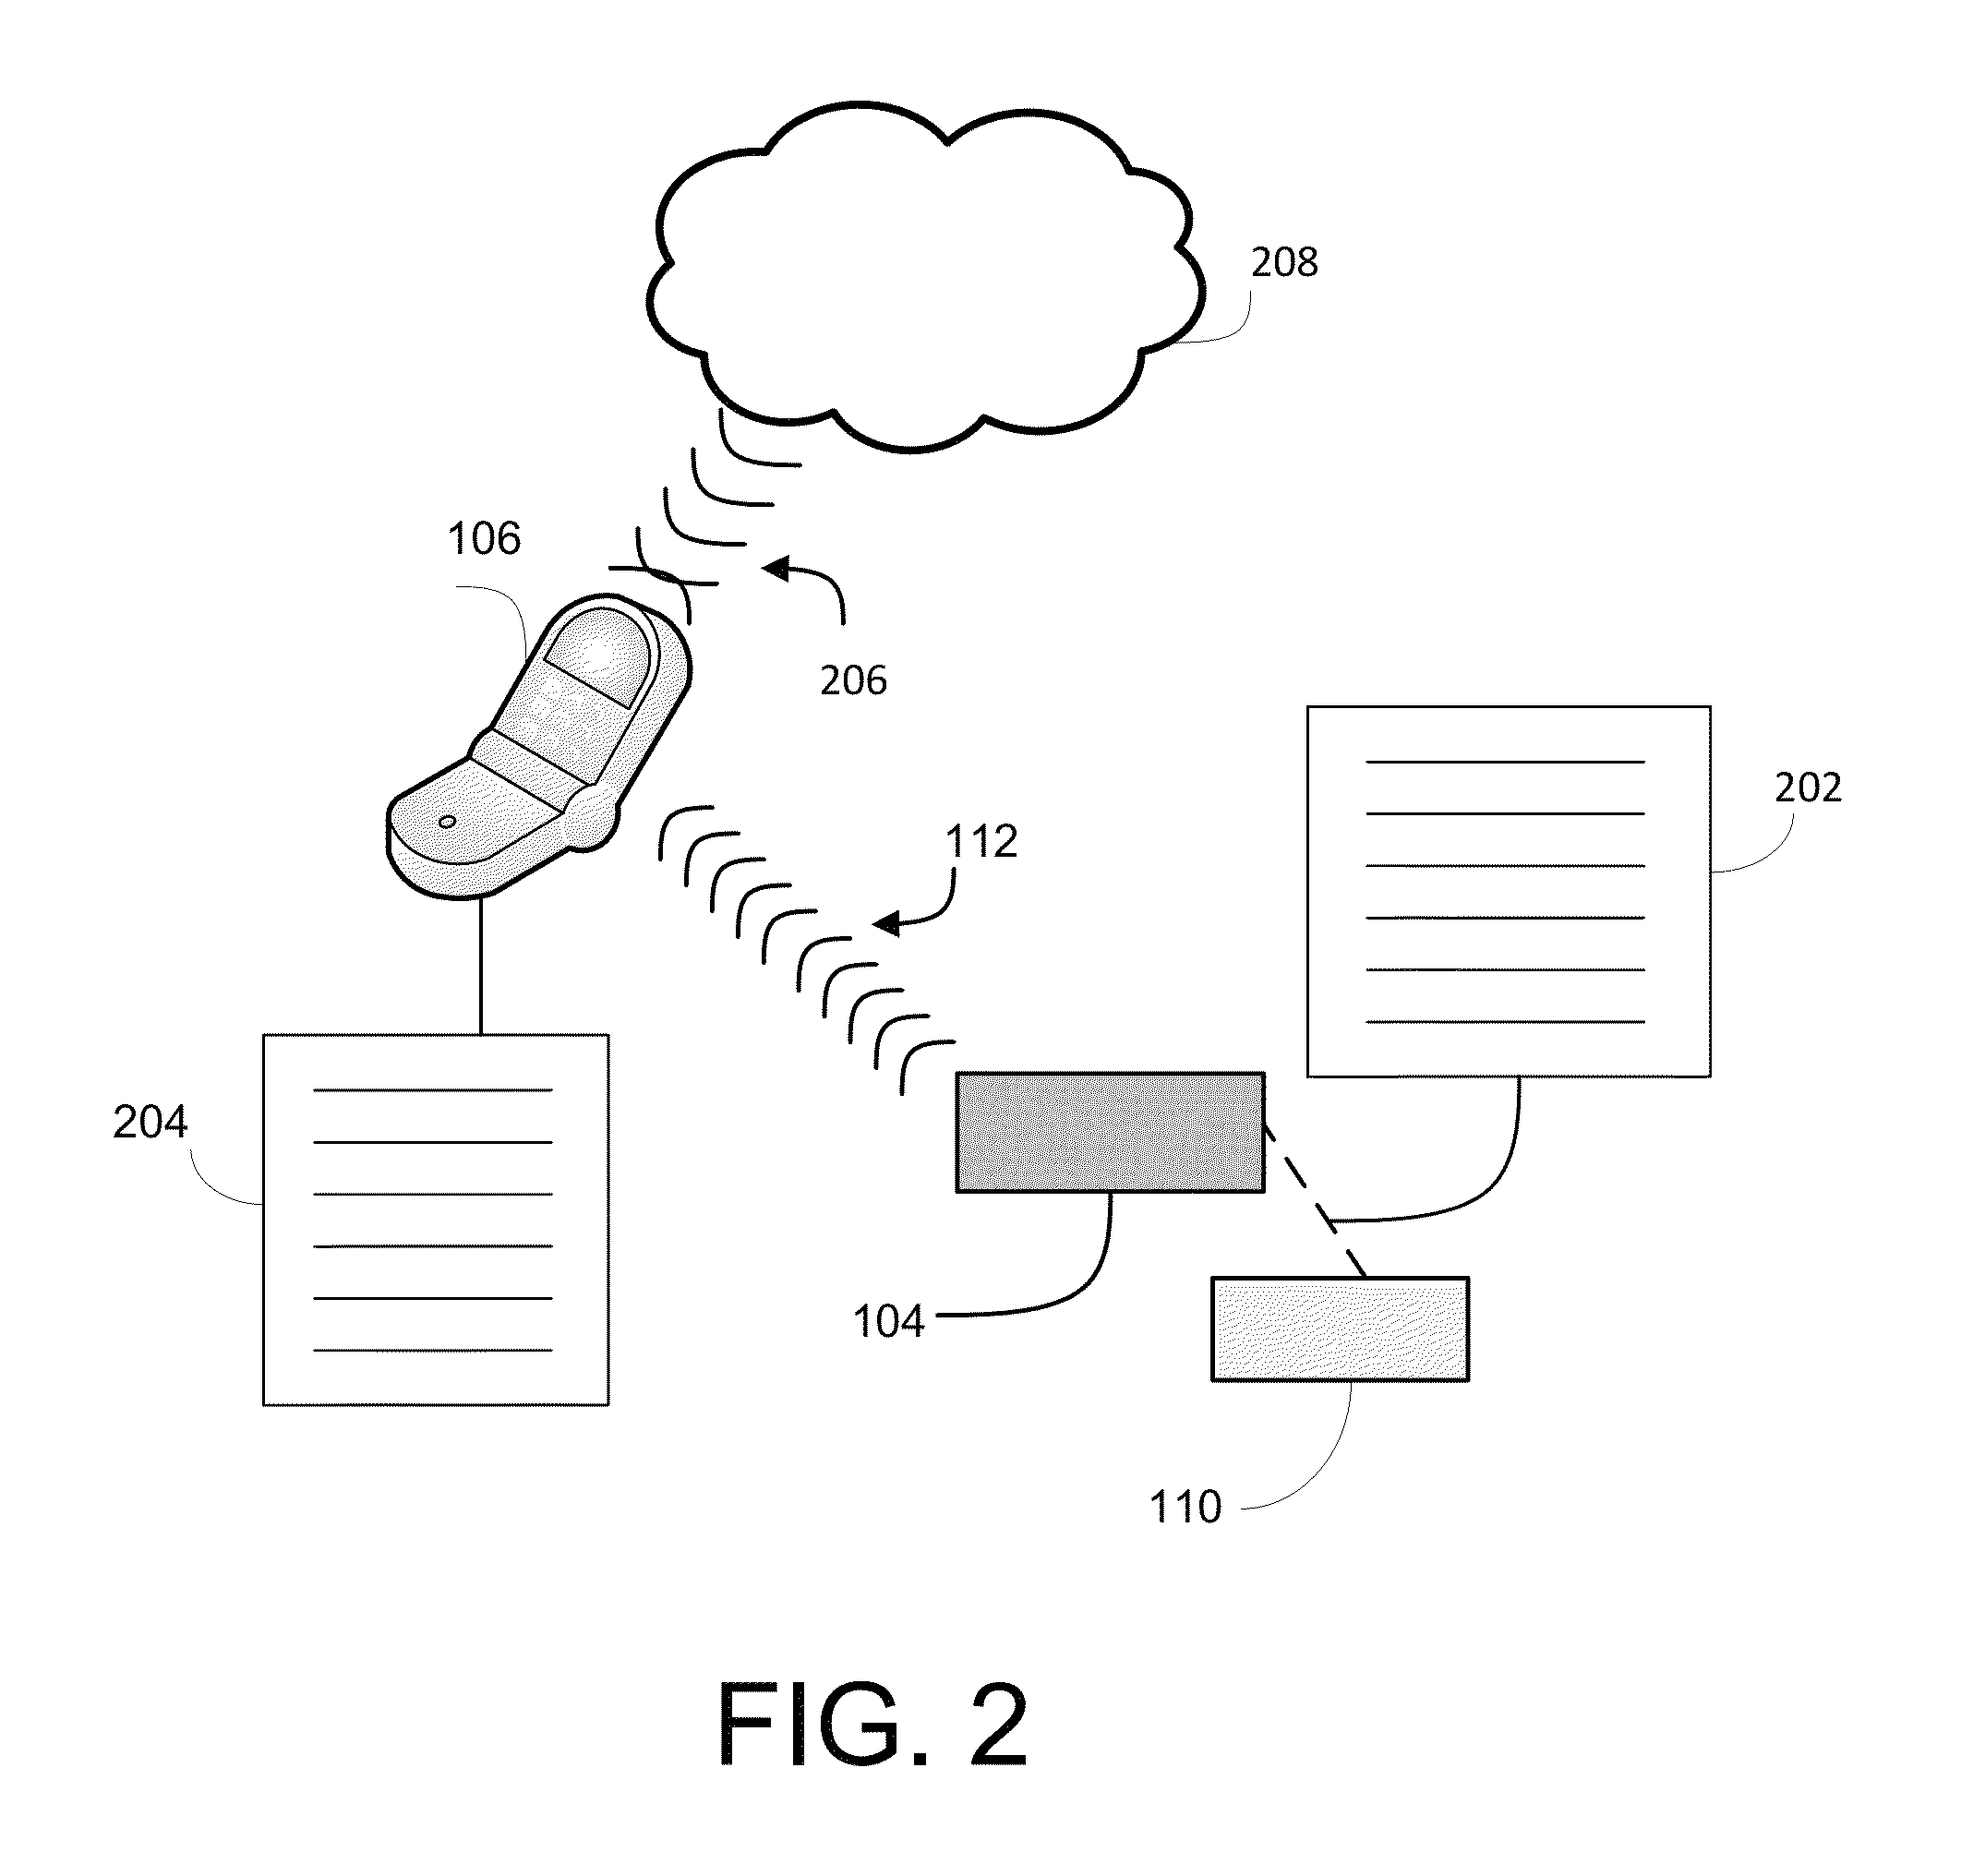 Systems and methods for telematics monitoring and communications